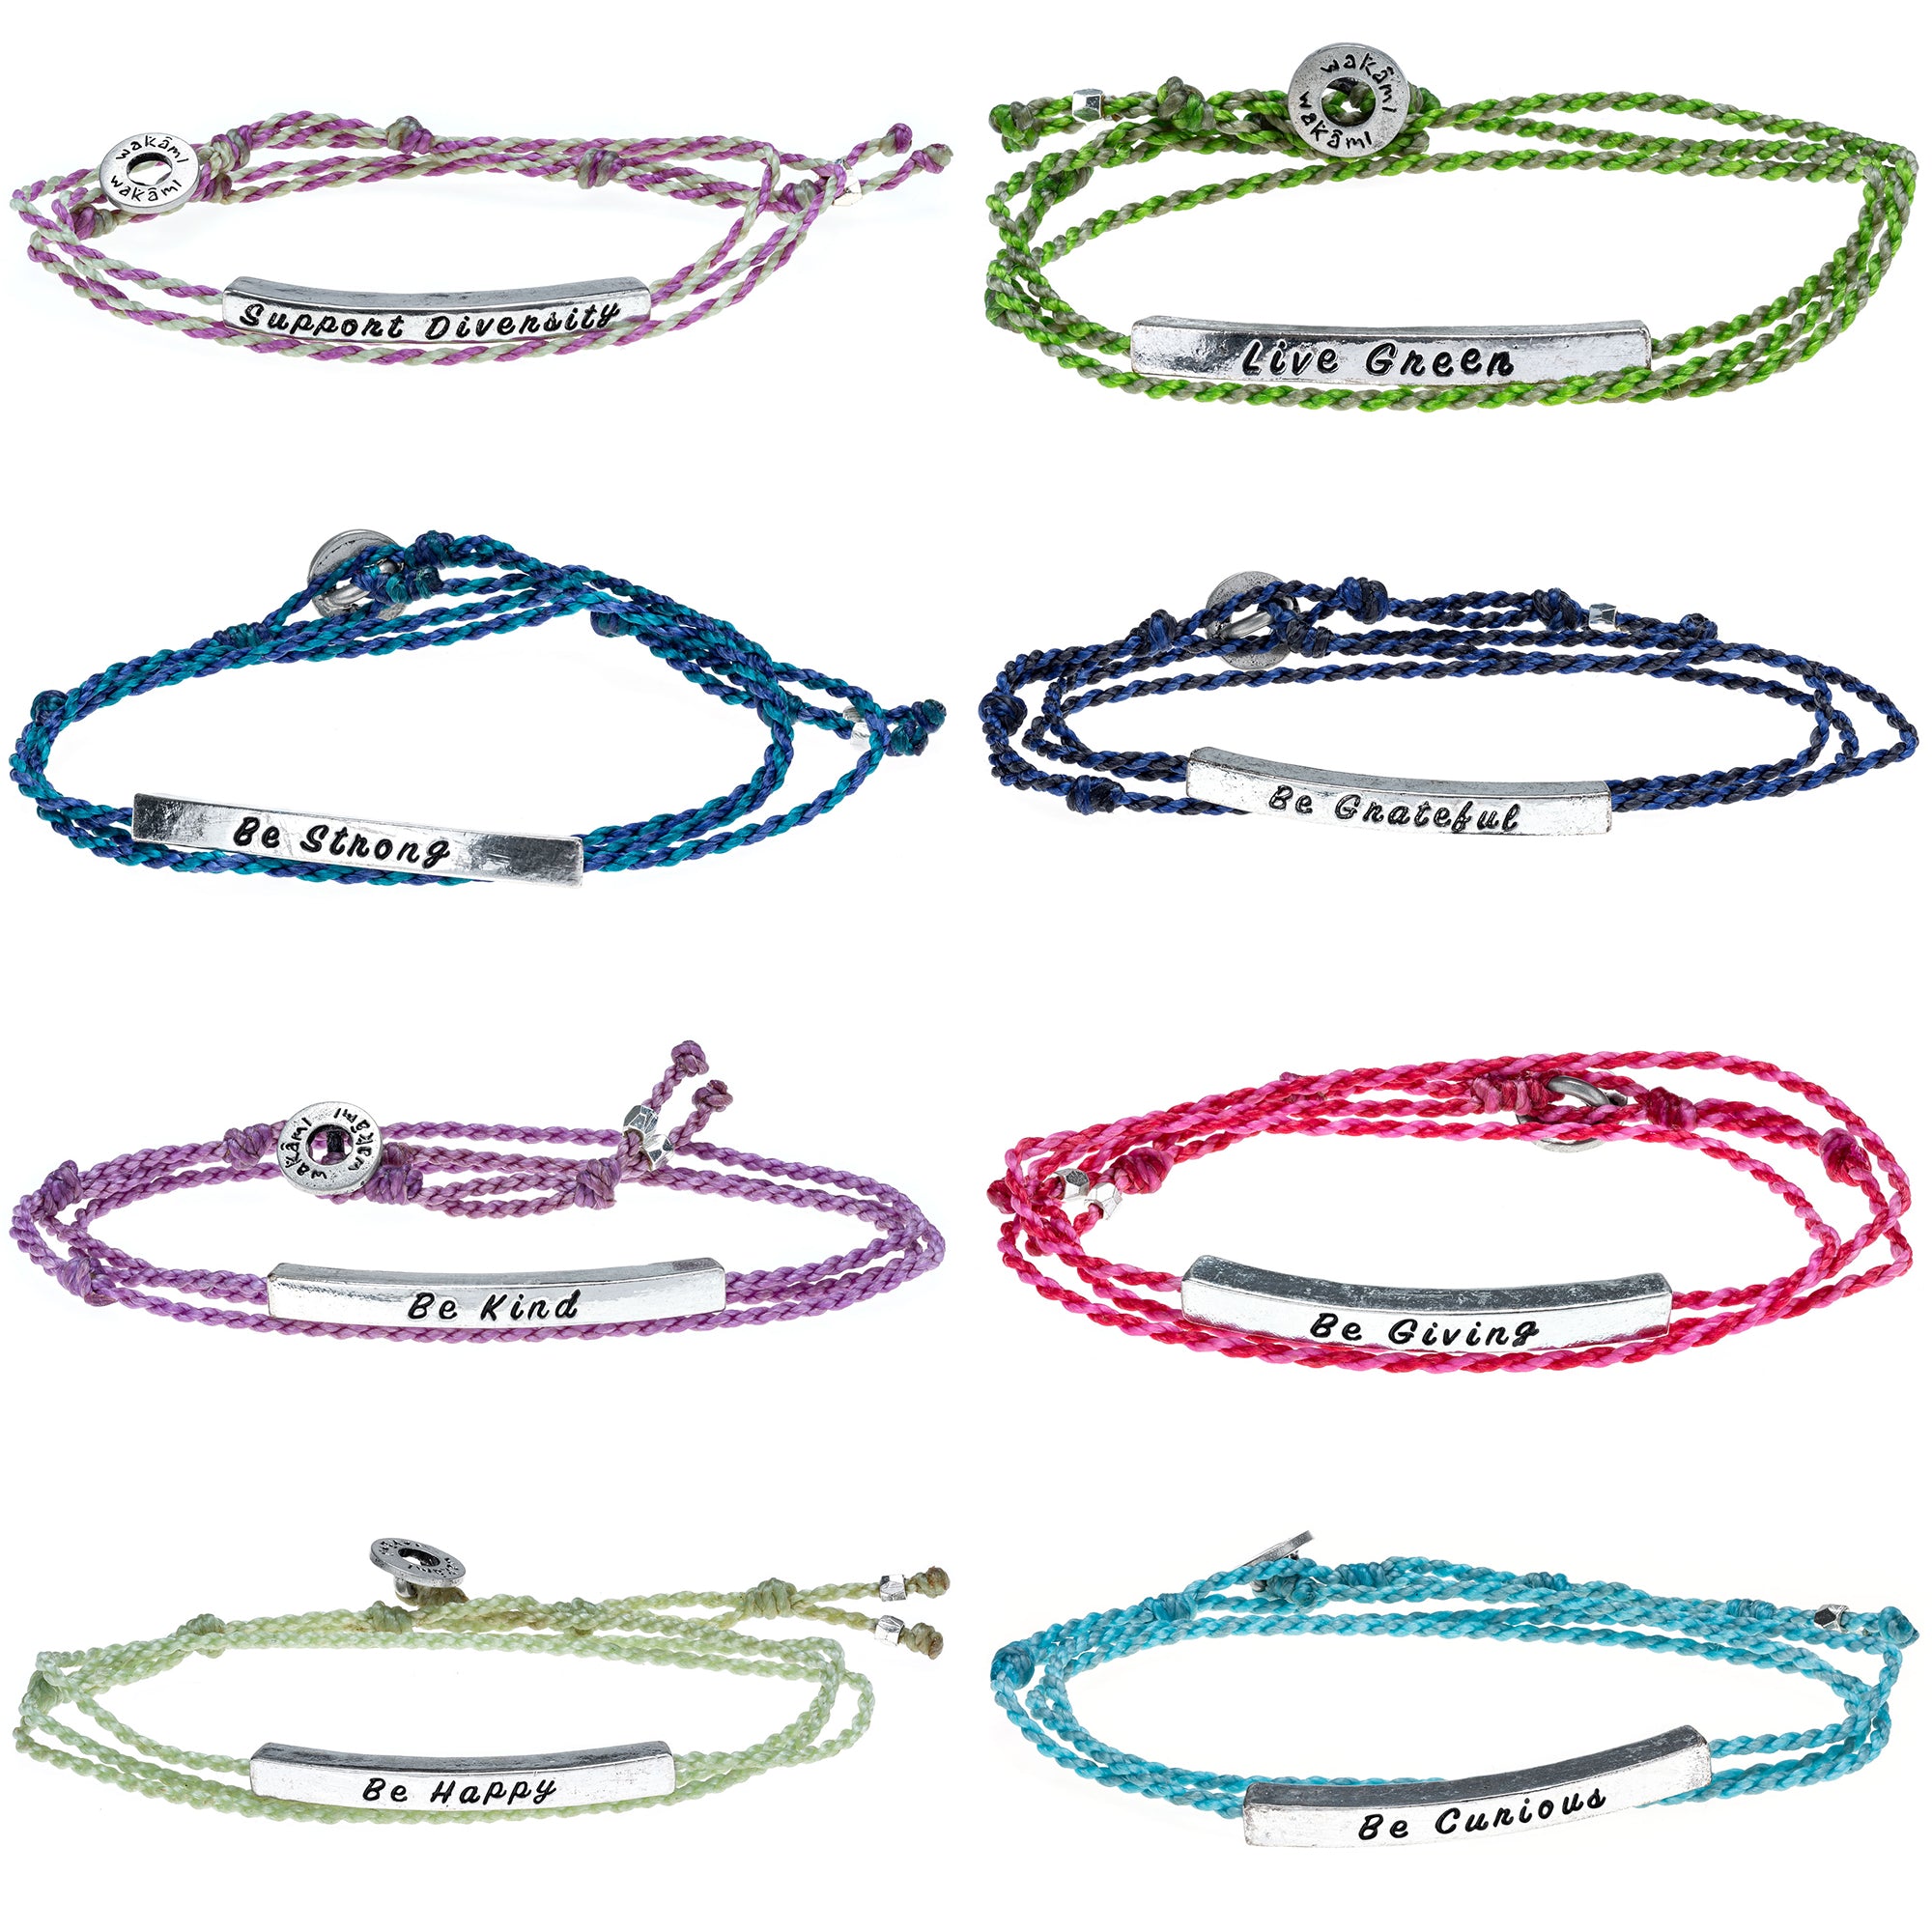 Be Inspired Triple Wrap Bracelet - BE CURIOUS